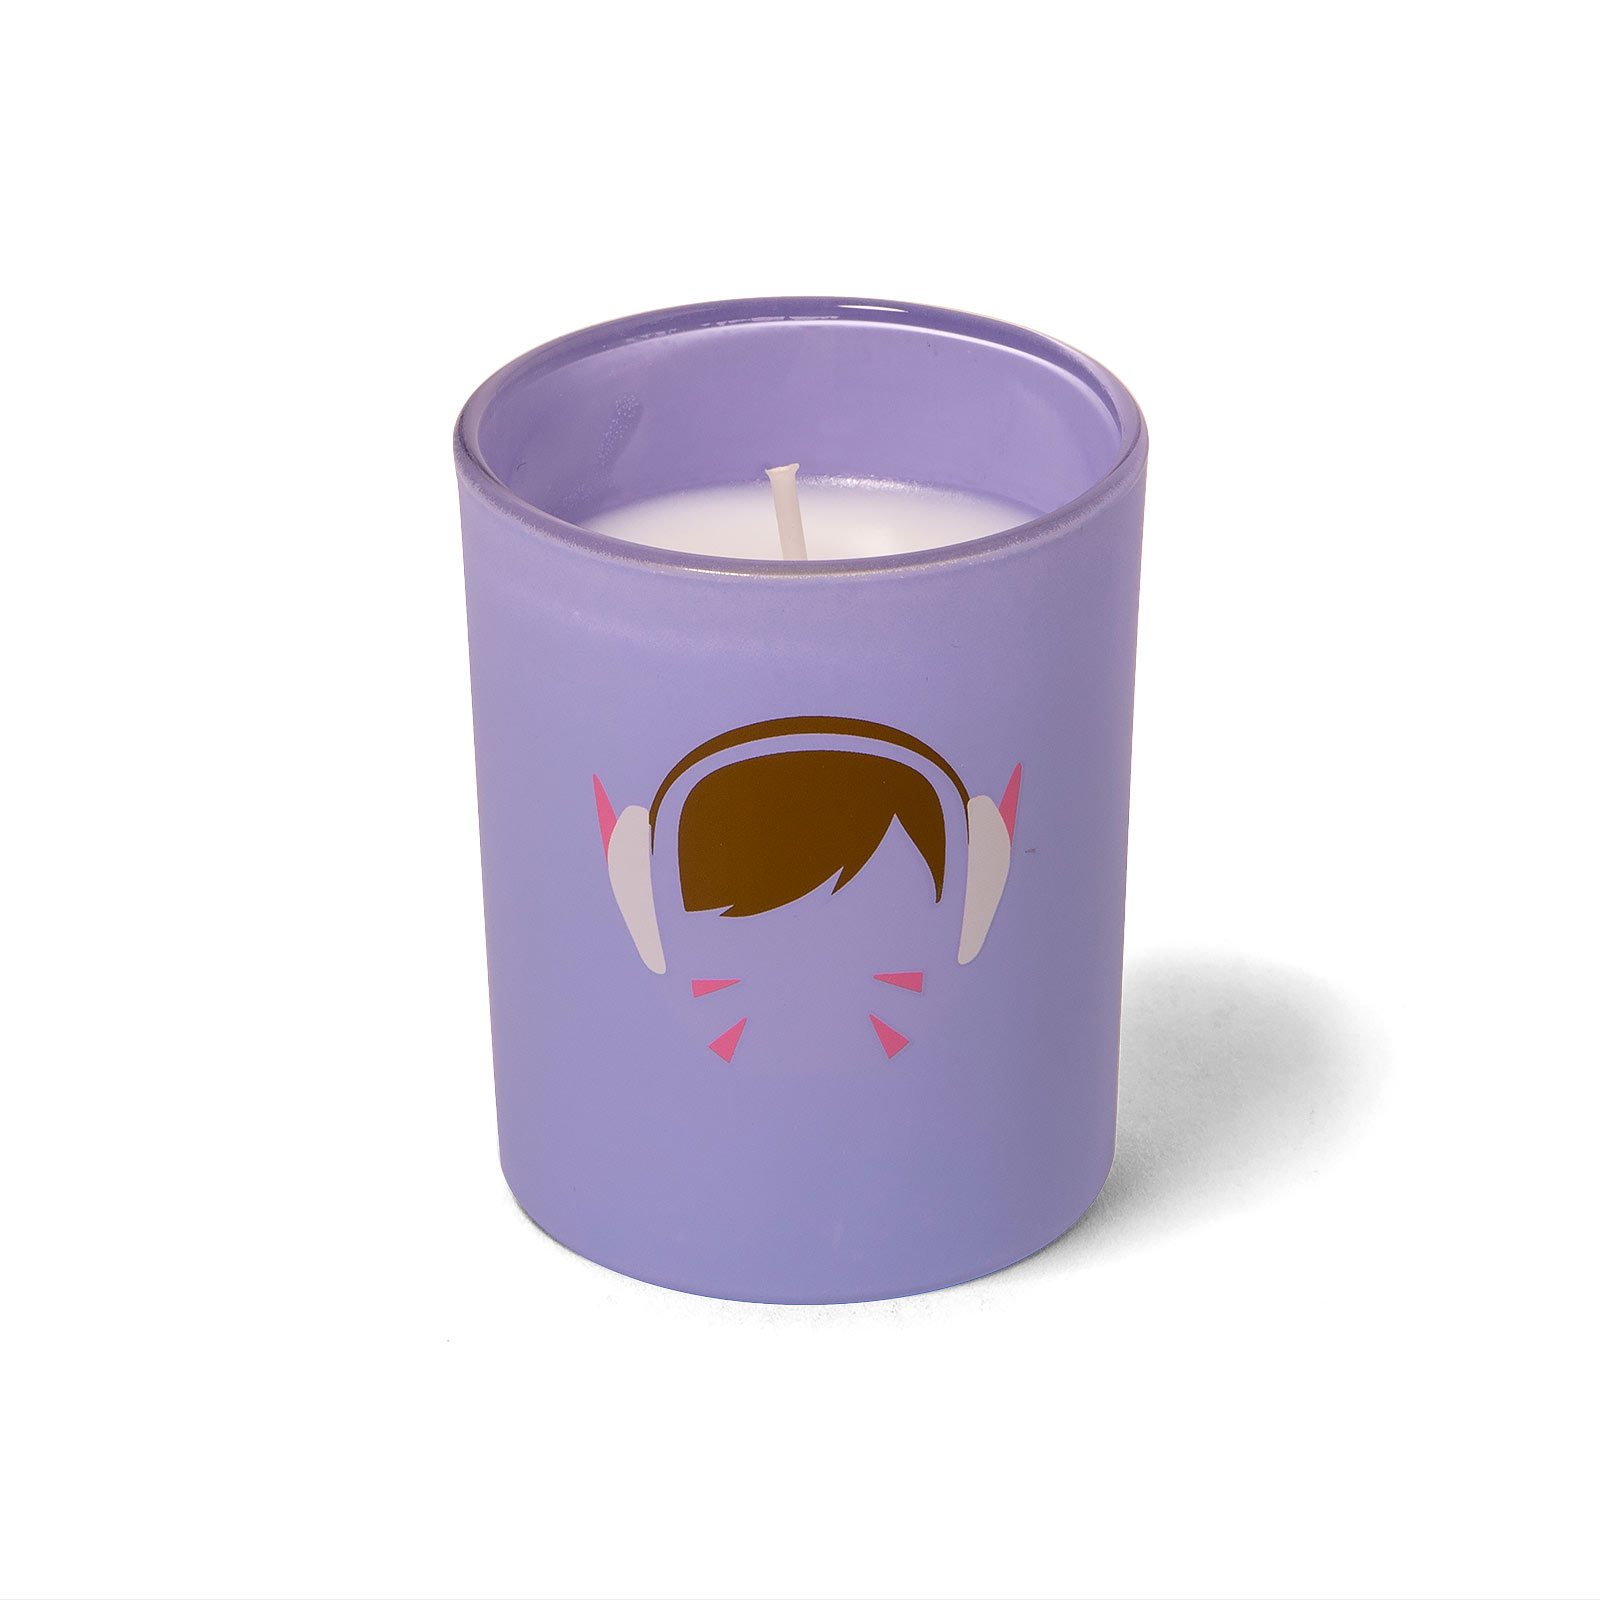 Overwatch - D.VA Candle in Glass